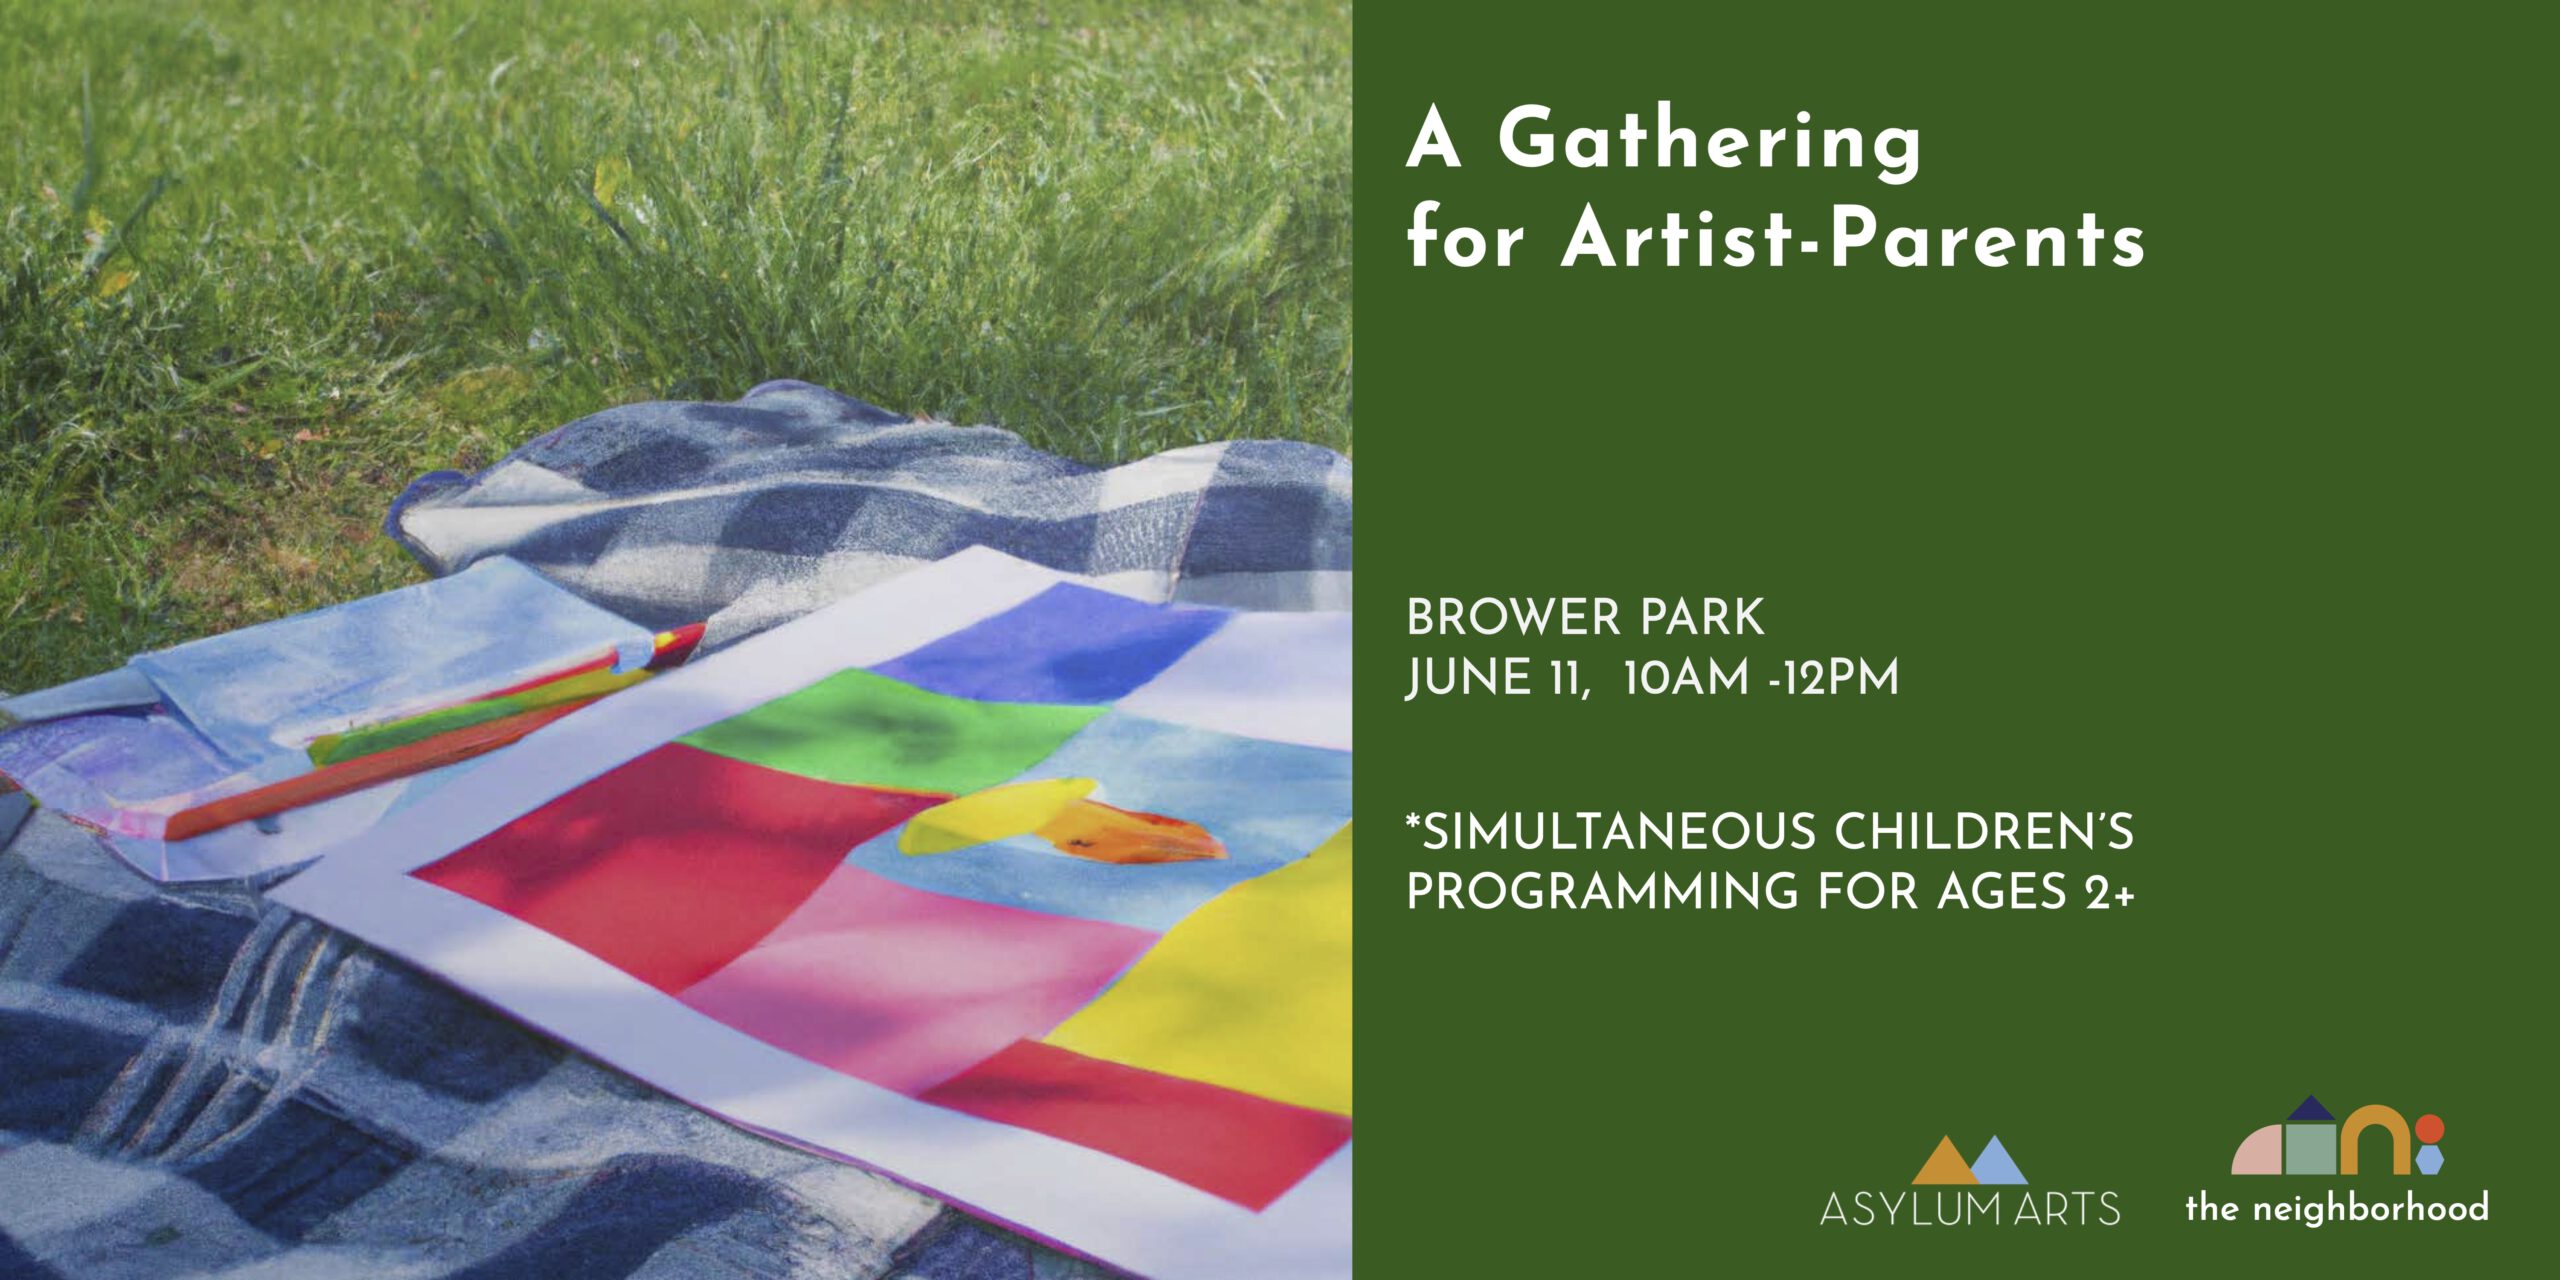 A Gathering for Artist-Parents